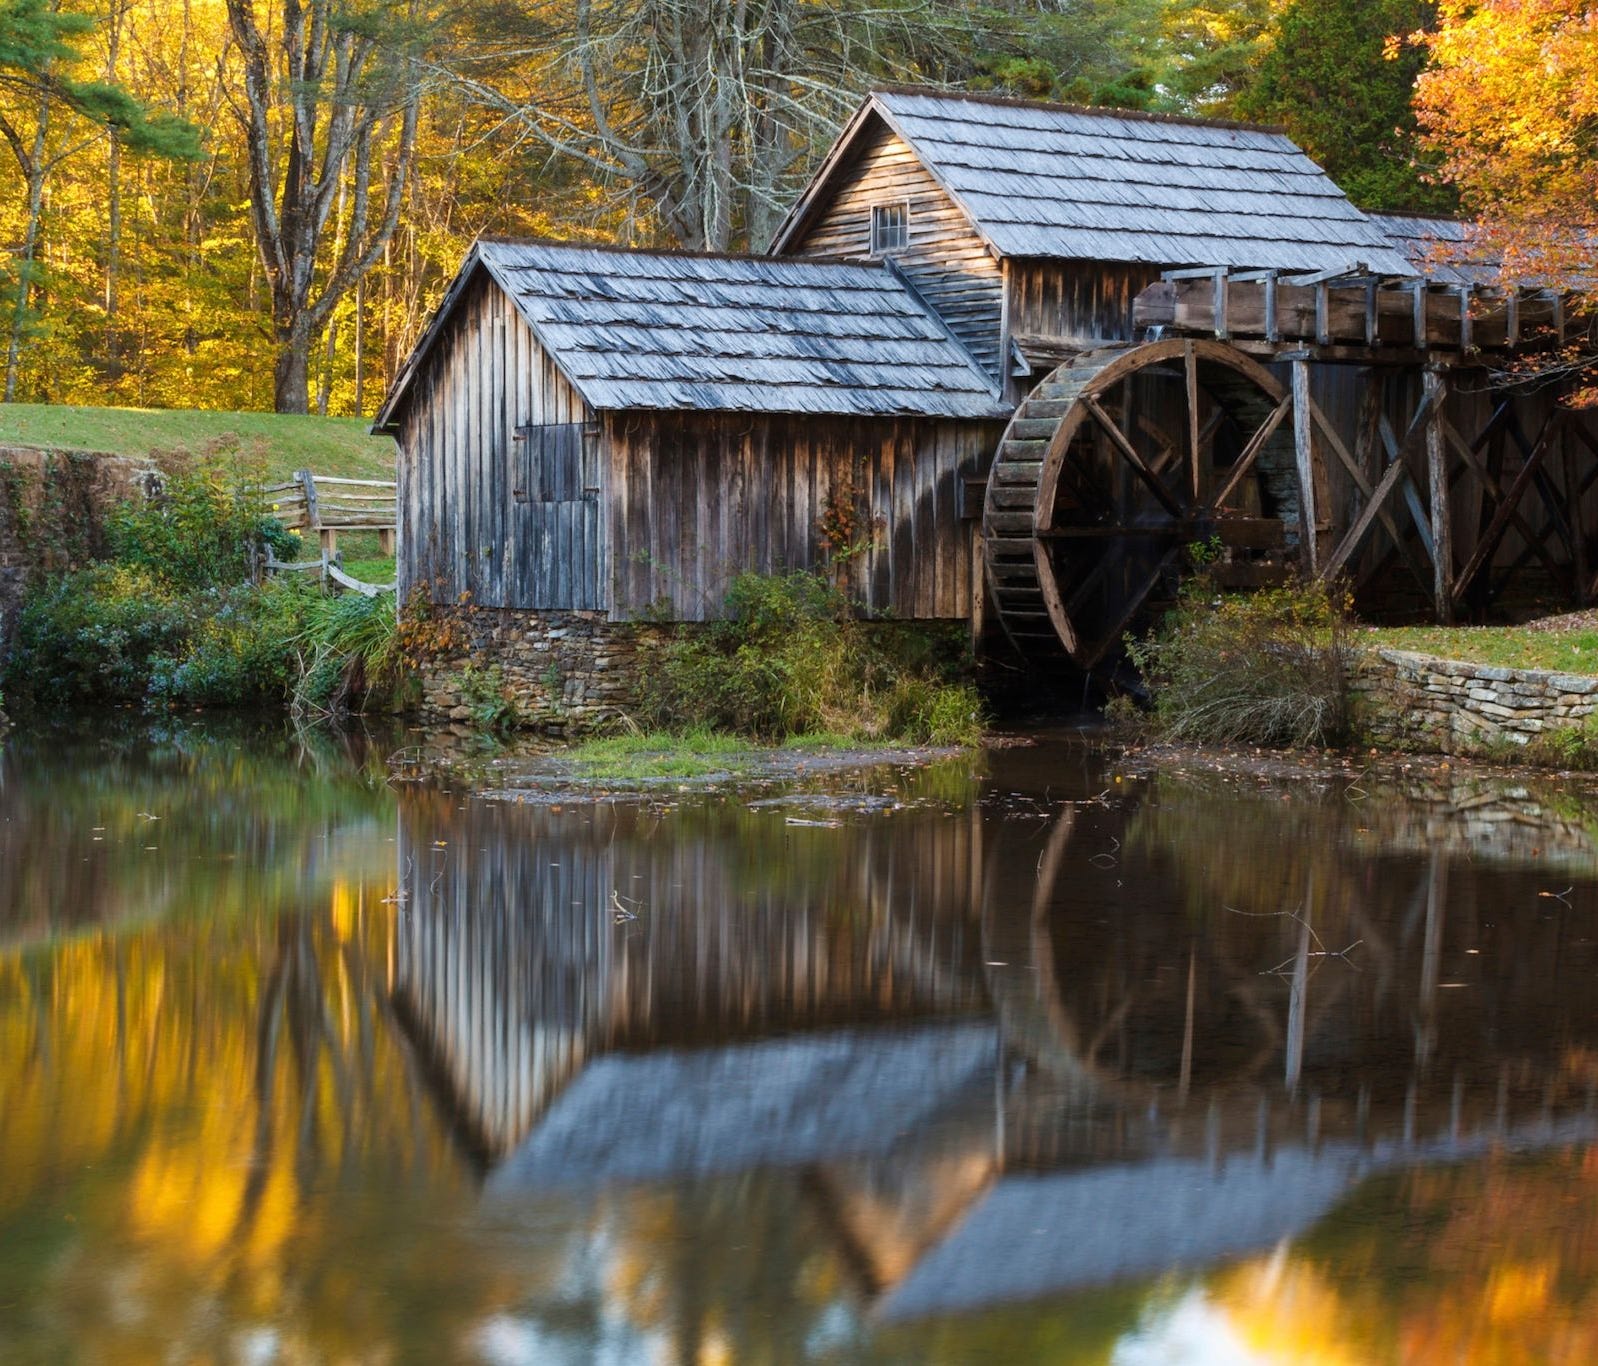 No trip along the Blue Ridge Parkway would be complete without a stop at historic Mabry Mill, a restored gristmill. The nearby Mabry Mill Restaurant is famous for its buckwheat pancakes and Virginia barbecue.